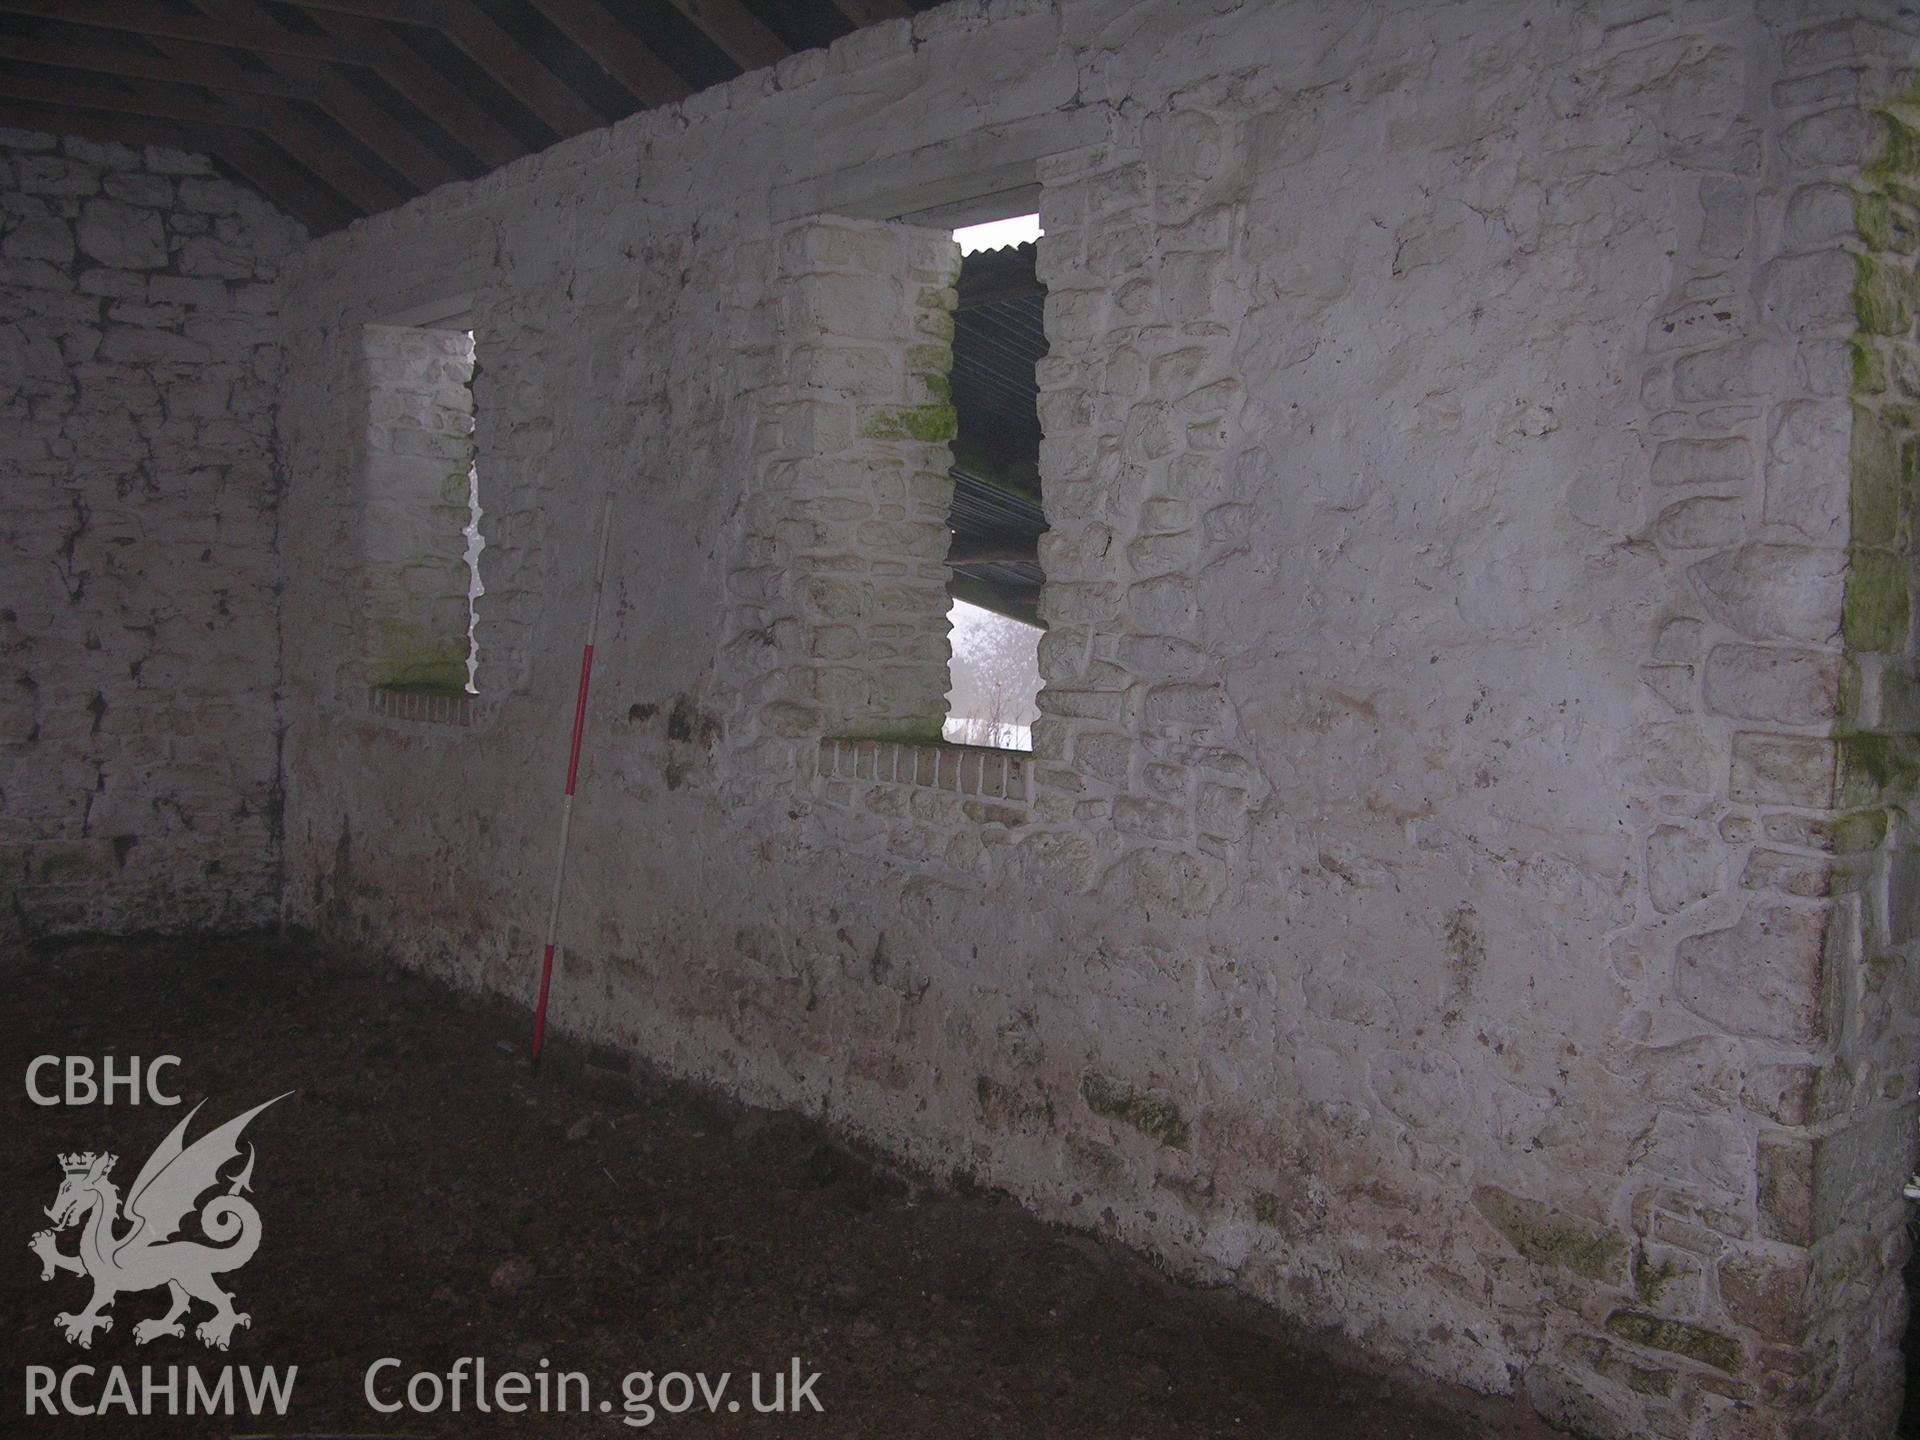 Digital photograph of an interior barn wall, from an Archaeological Building Recording of Hillside Barn, Llanvaches, Monmouthshire, which was conducted by Cambrian Archaeological Projects.